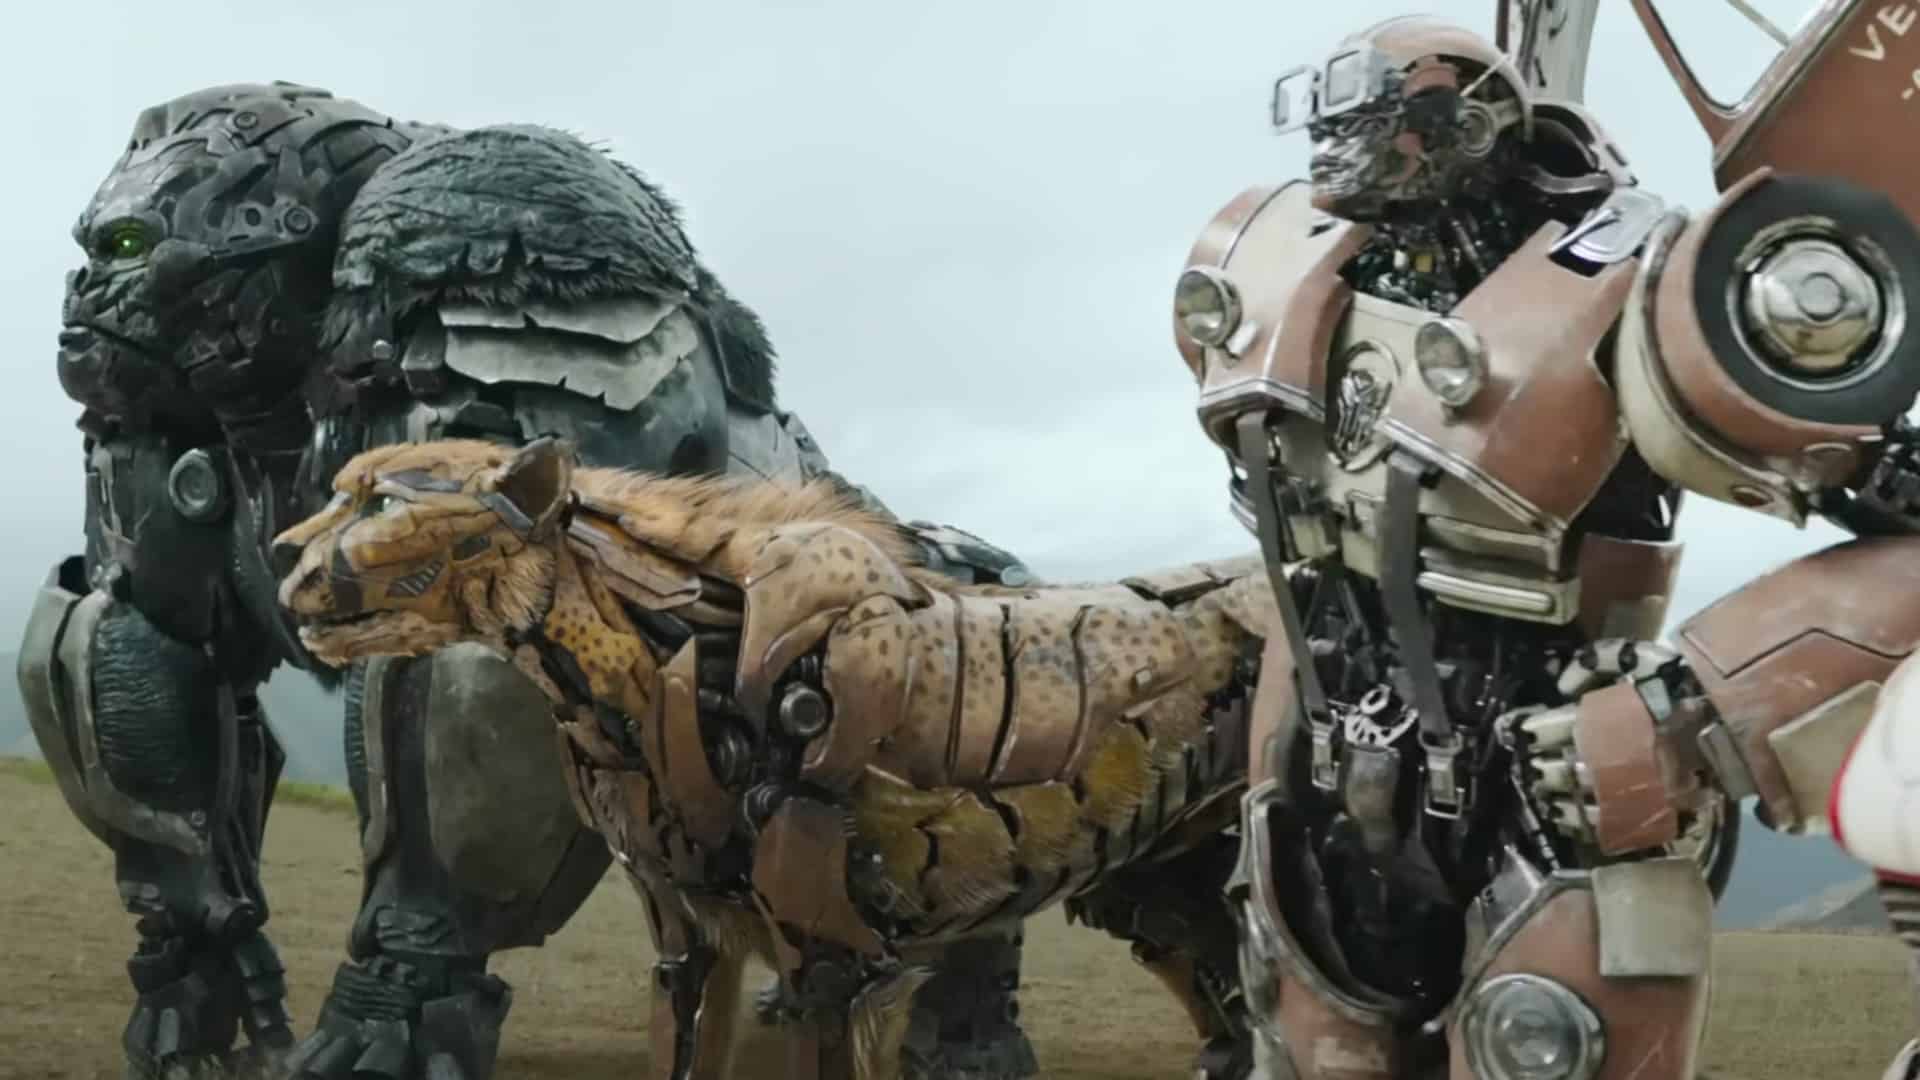 Transformers: Rise of the Beasts Box Office: $8.8 Million in Previews